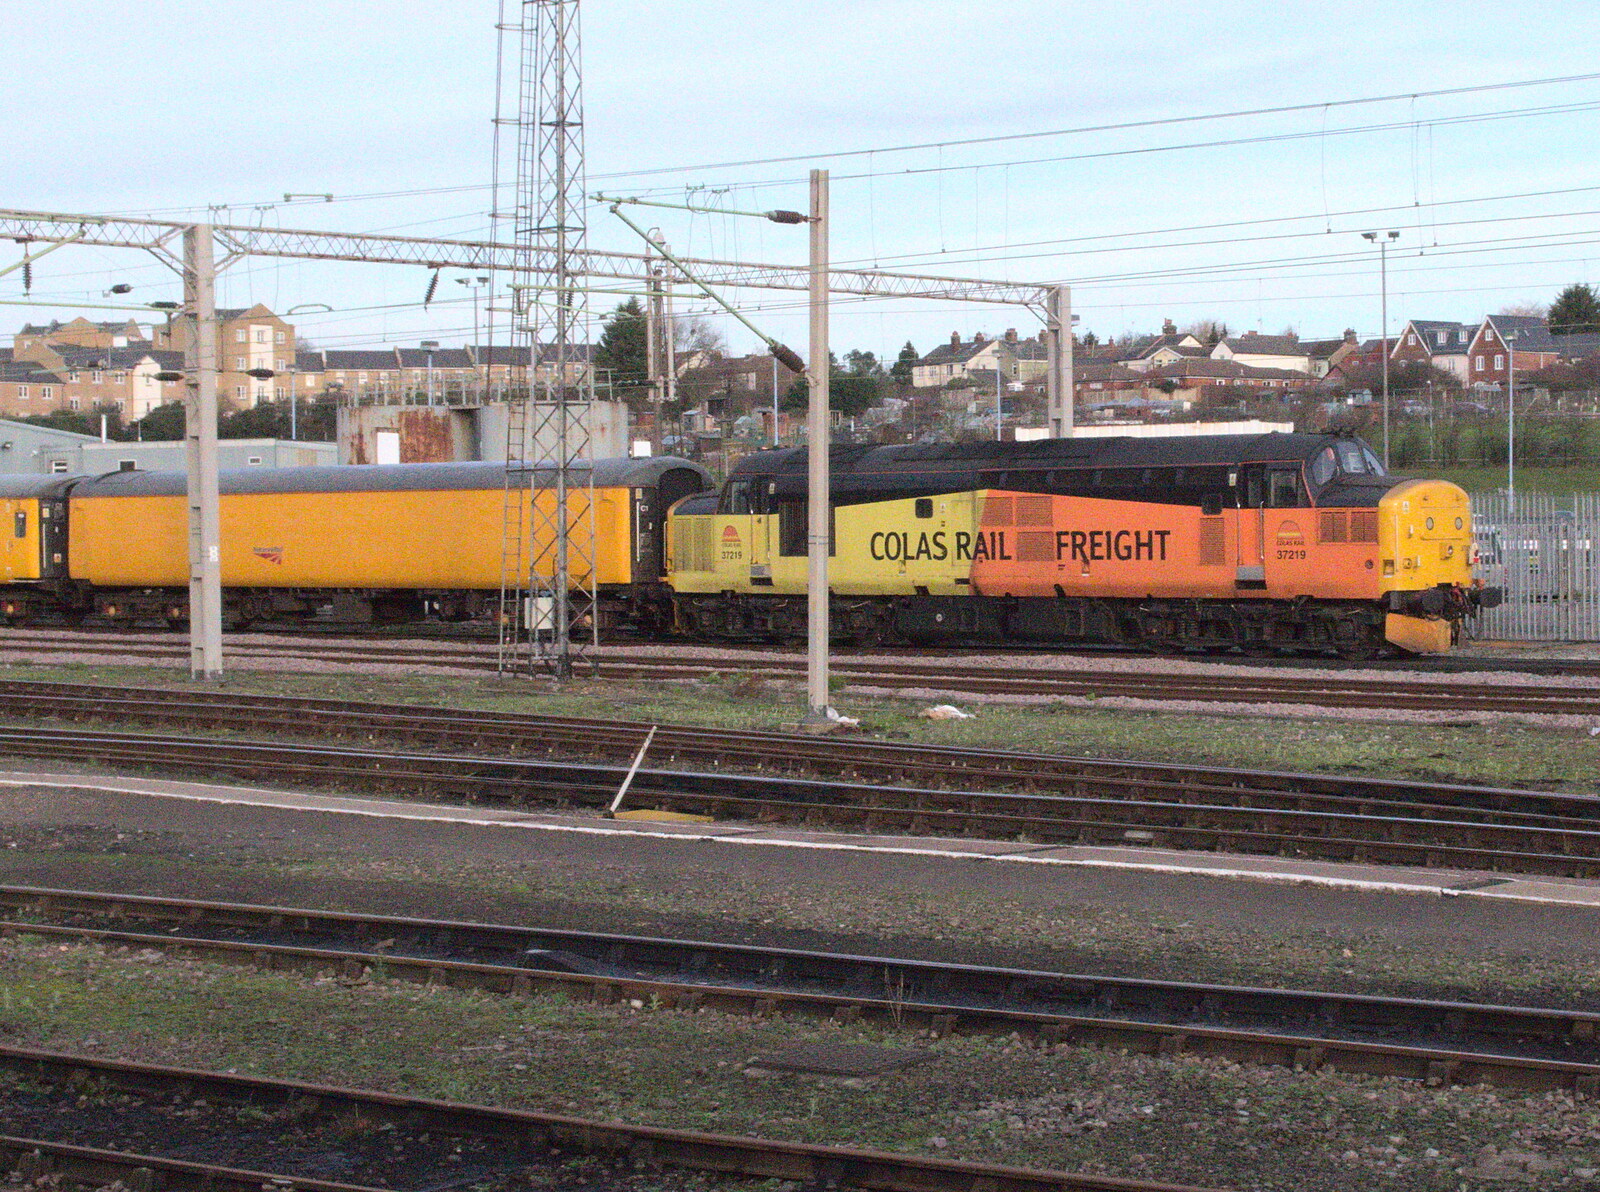 Colas Rail Freight Class 37 37219 at Colchester from Ten-Pin Bowling, Riverside, Norwich - 3rd January 2016